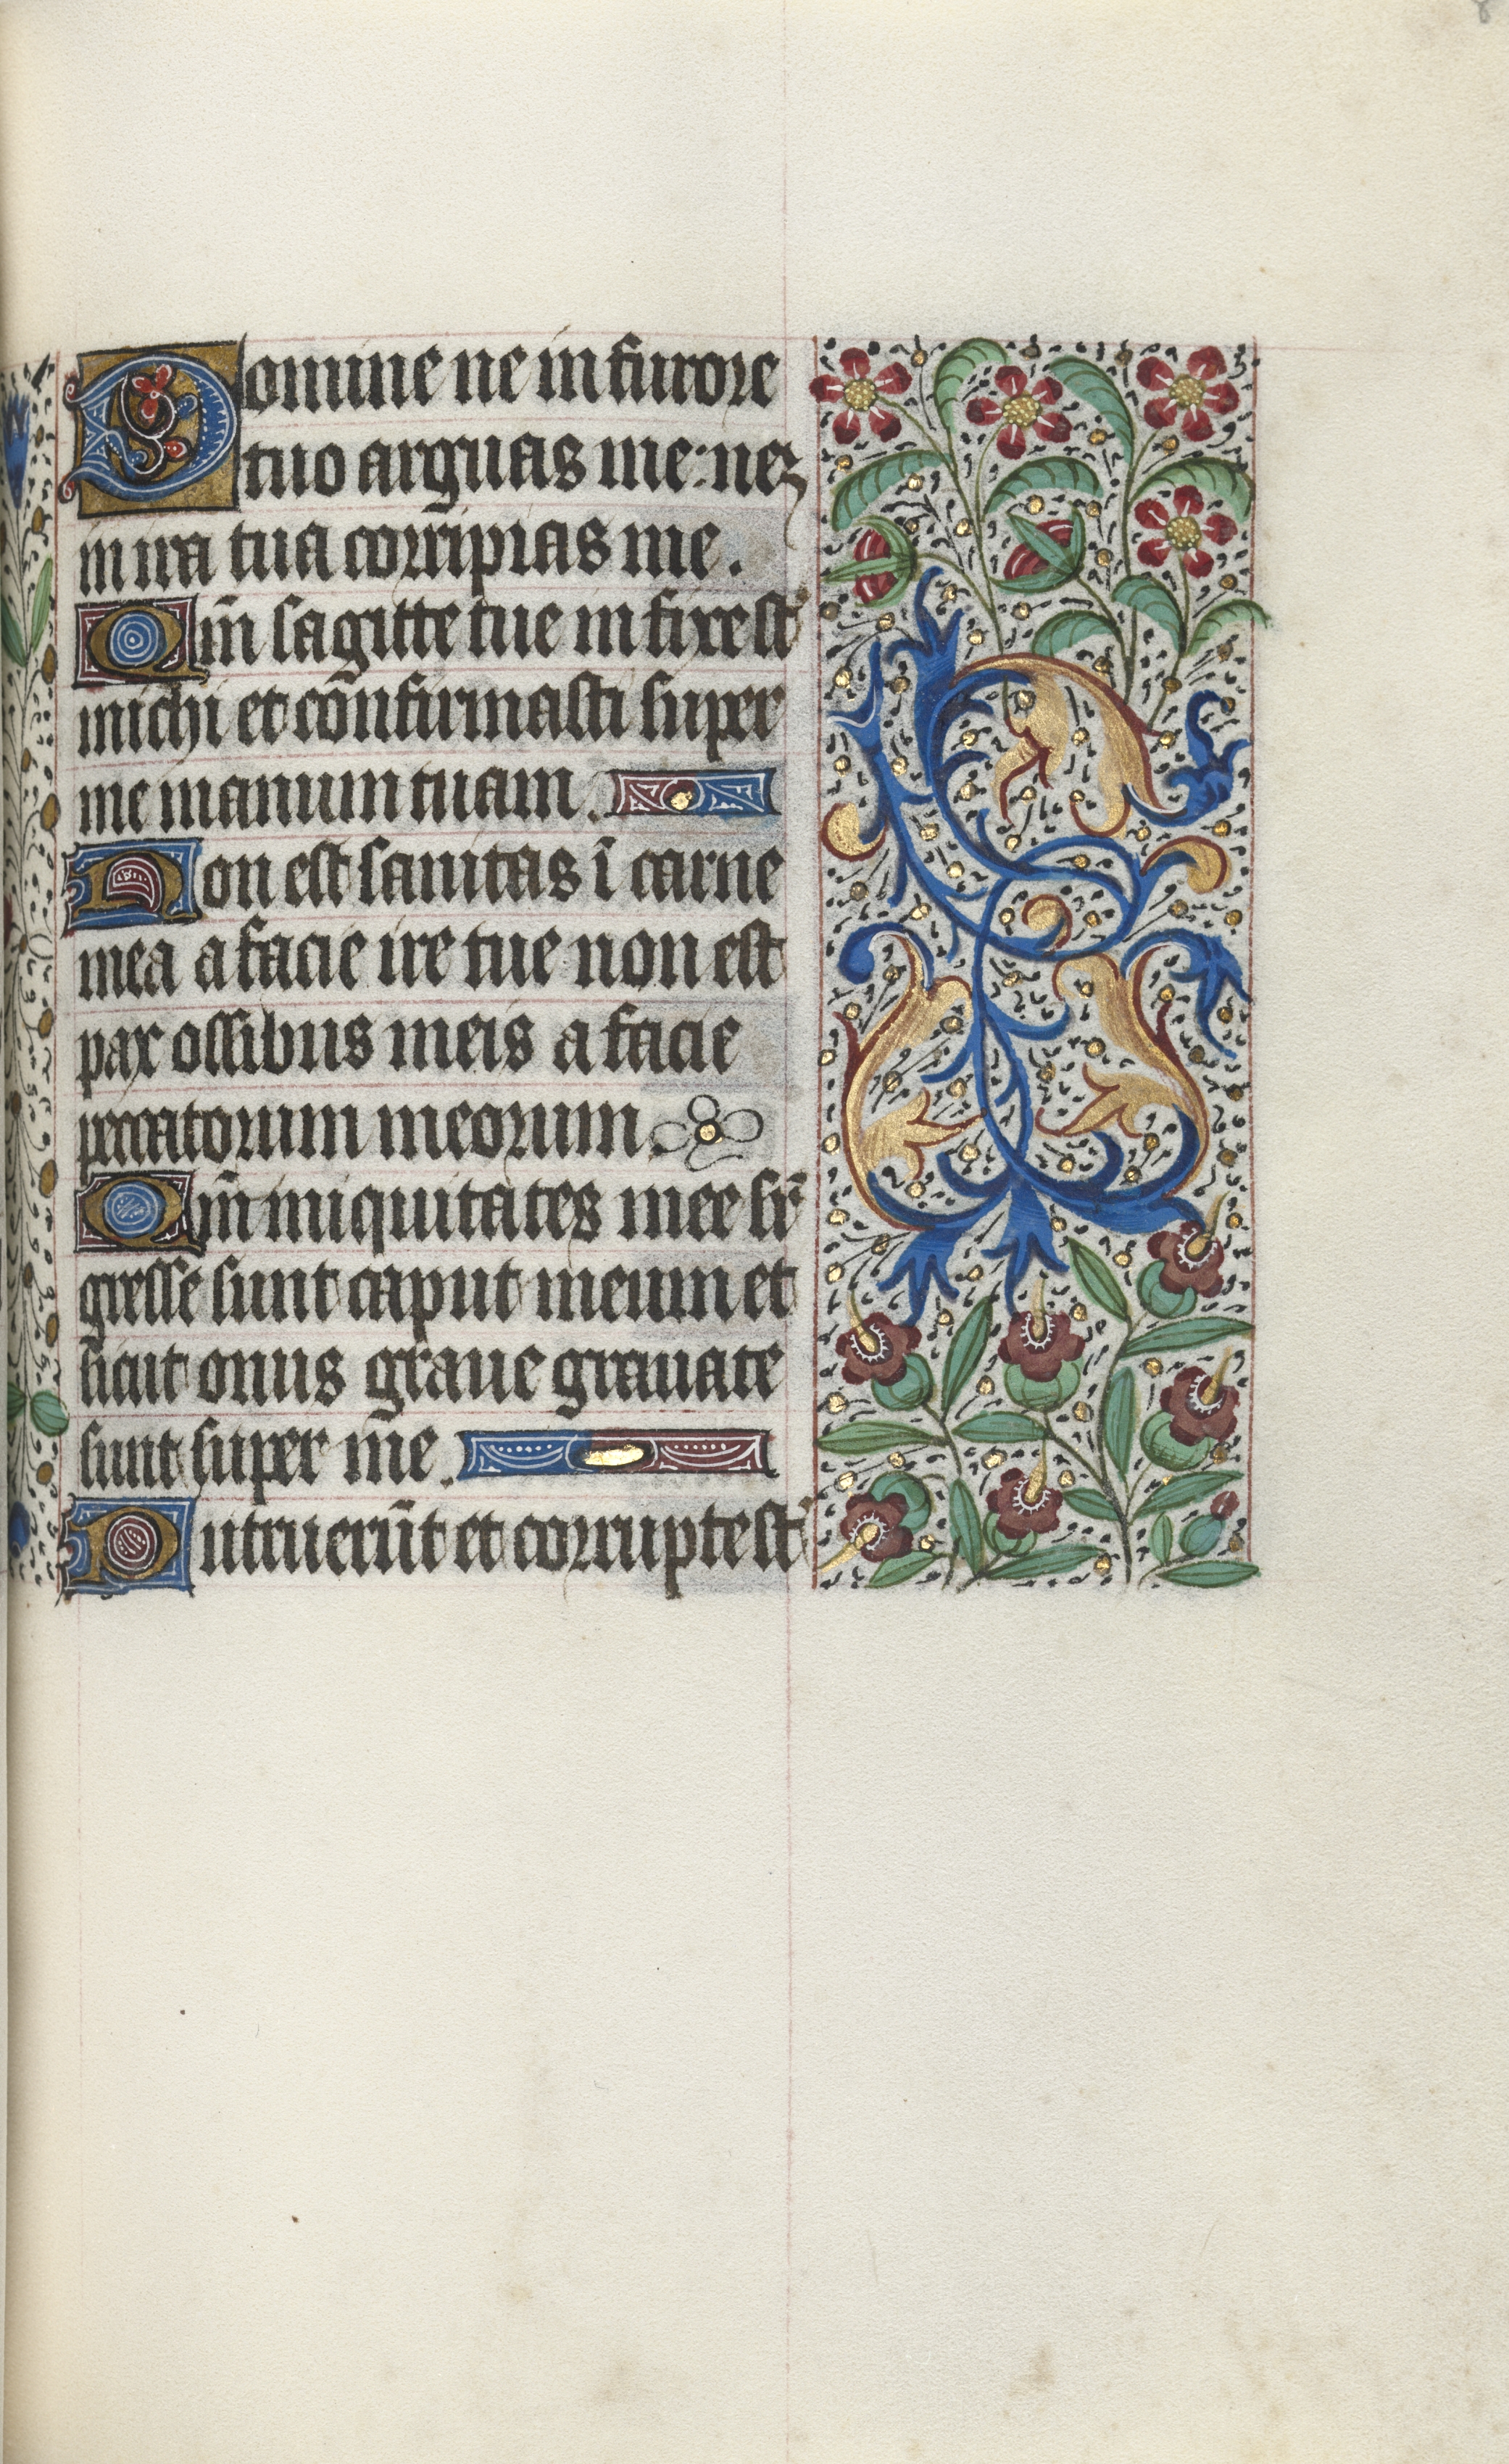 Book of Hours (Use of Rouen): fol. 83r